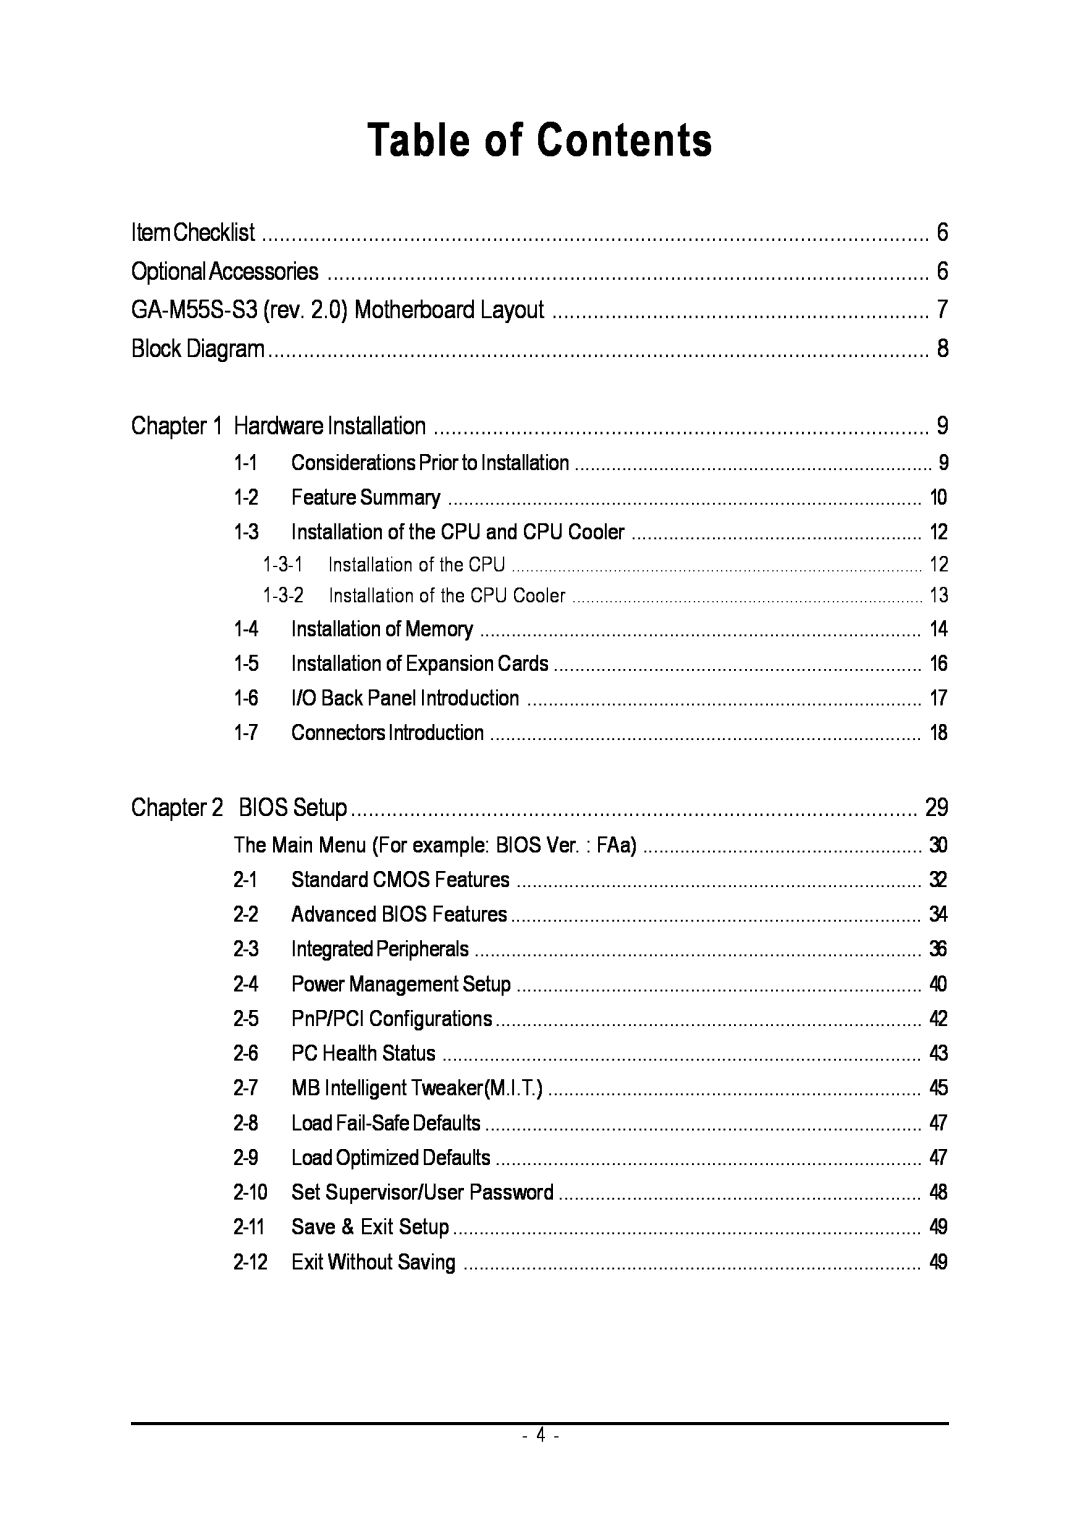 Gigabyte GA-M55S-S3 user manual Table of Contents 